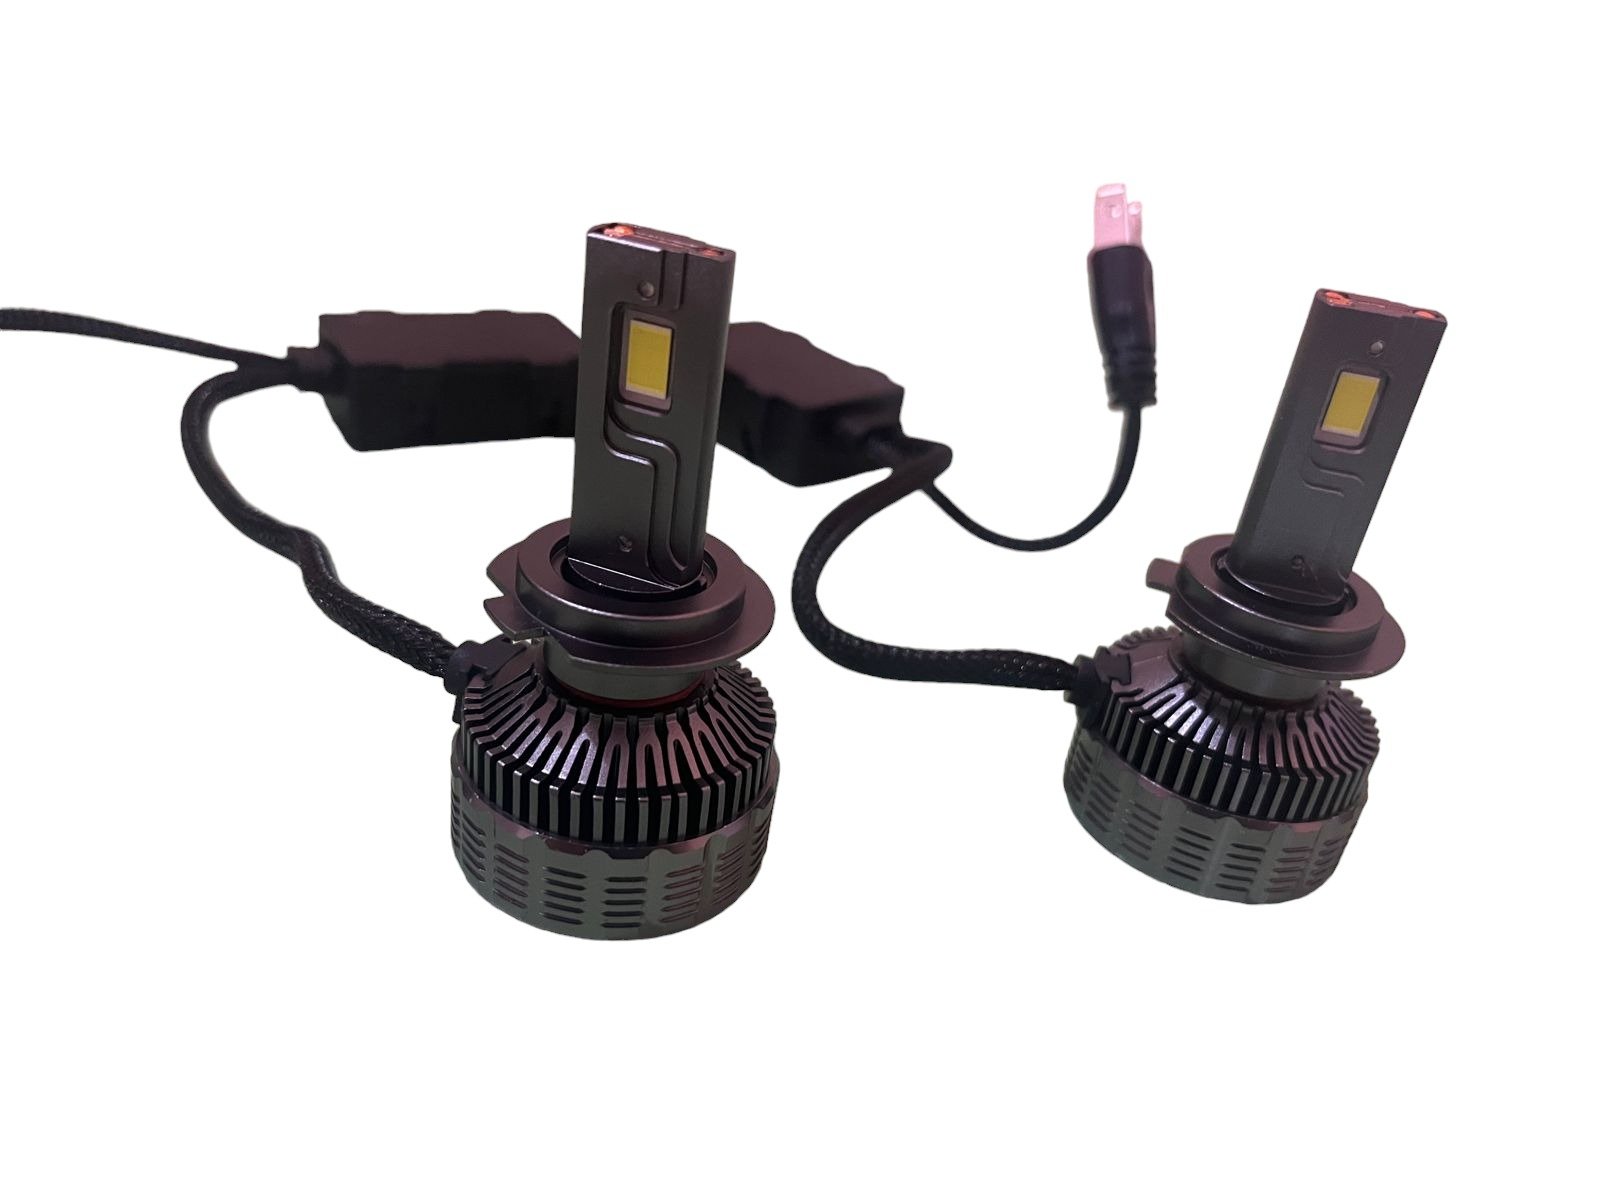 H7 High Quality Super Bright LED For Car 300W/30000LM Pair 6500K With 1Year Warranty(H7) Image 